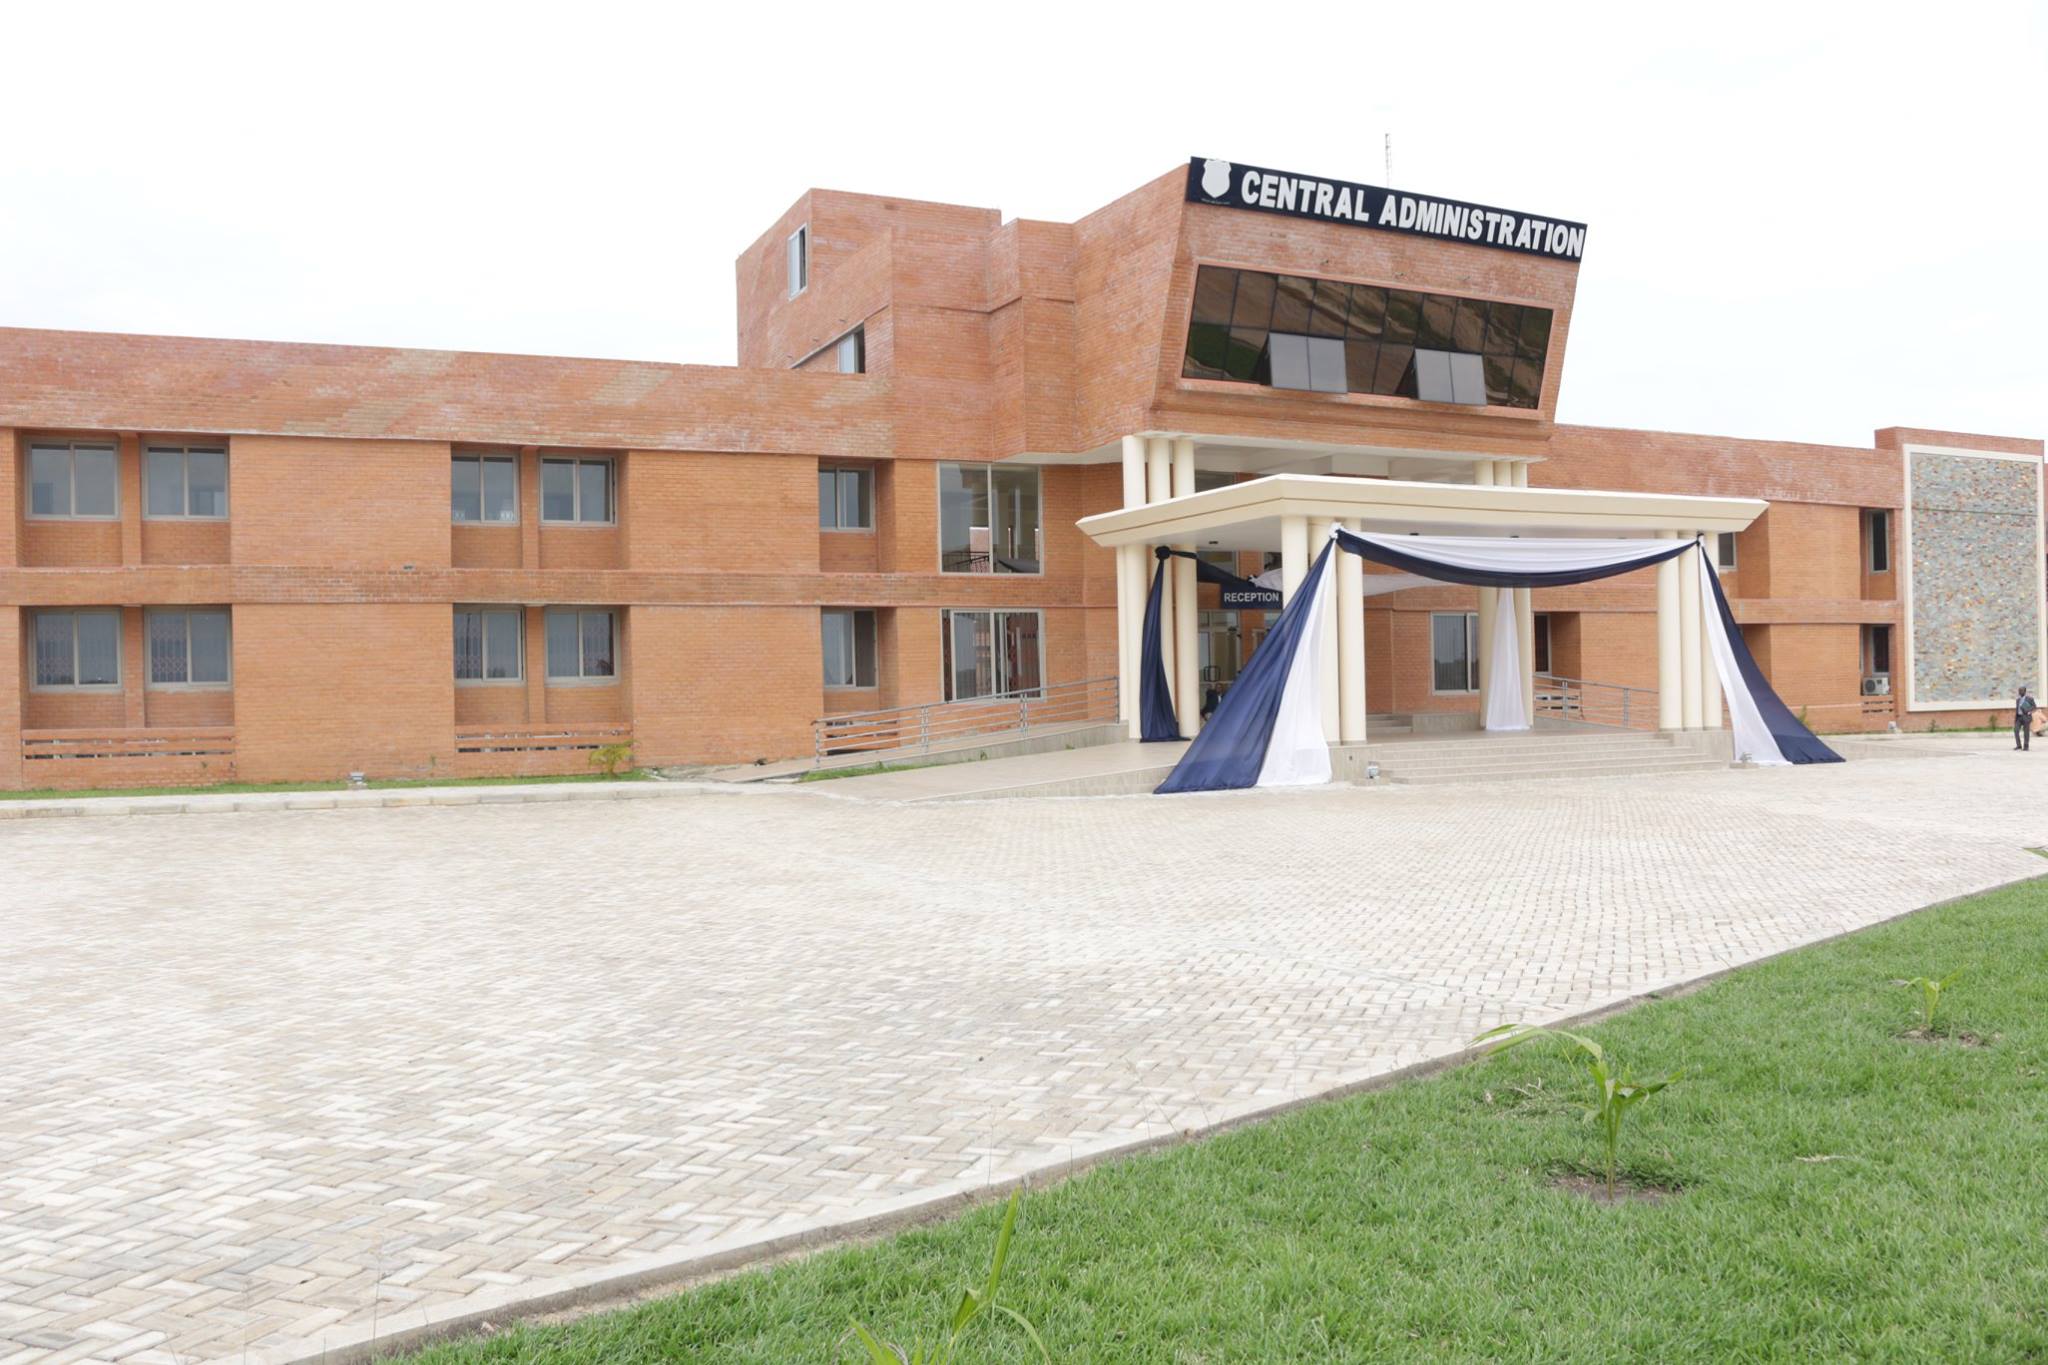 Nduom School of Business holds open day